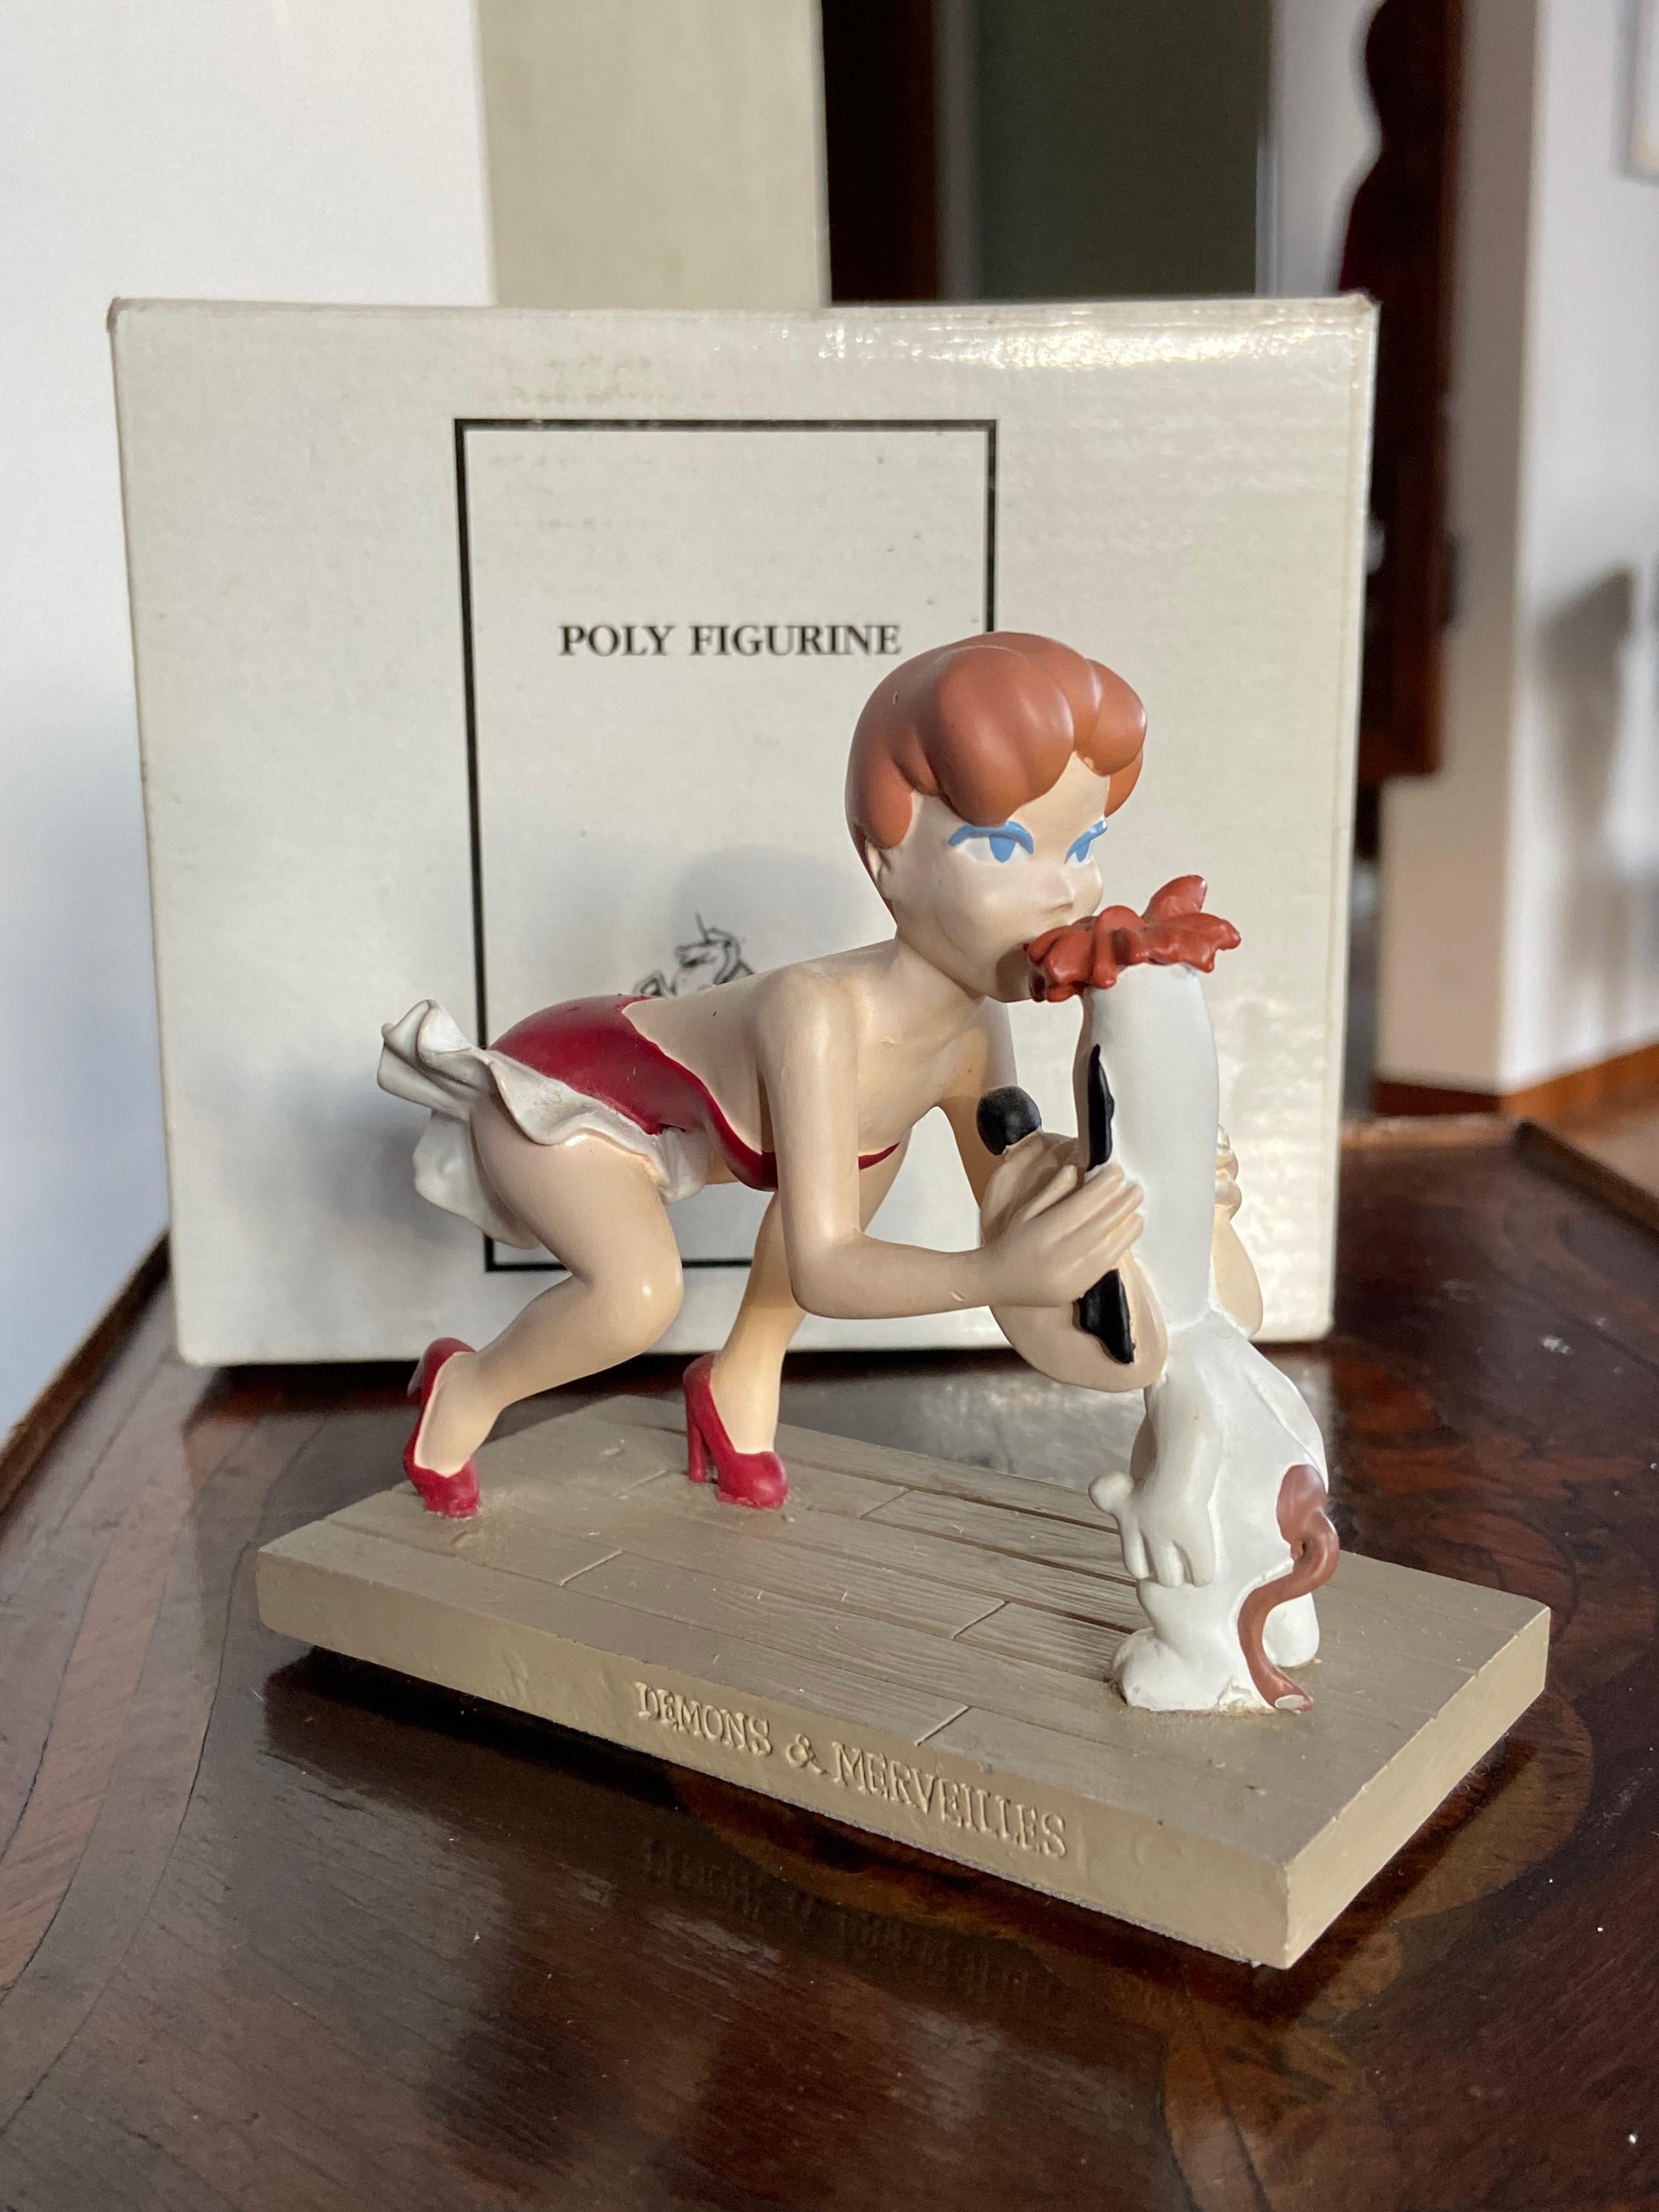 Figurine statue of Droopy kissed by the Girl by Demons & Merveilles.
Made in 1997 in its original box in perfect condition.
Perfect gift and a part of a large collection.
USA, 1997.